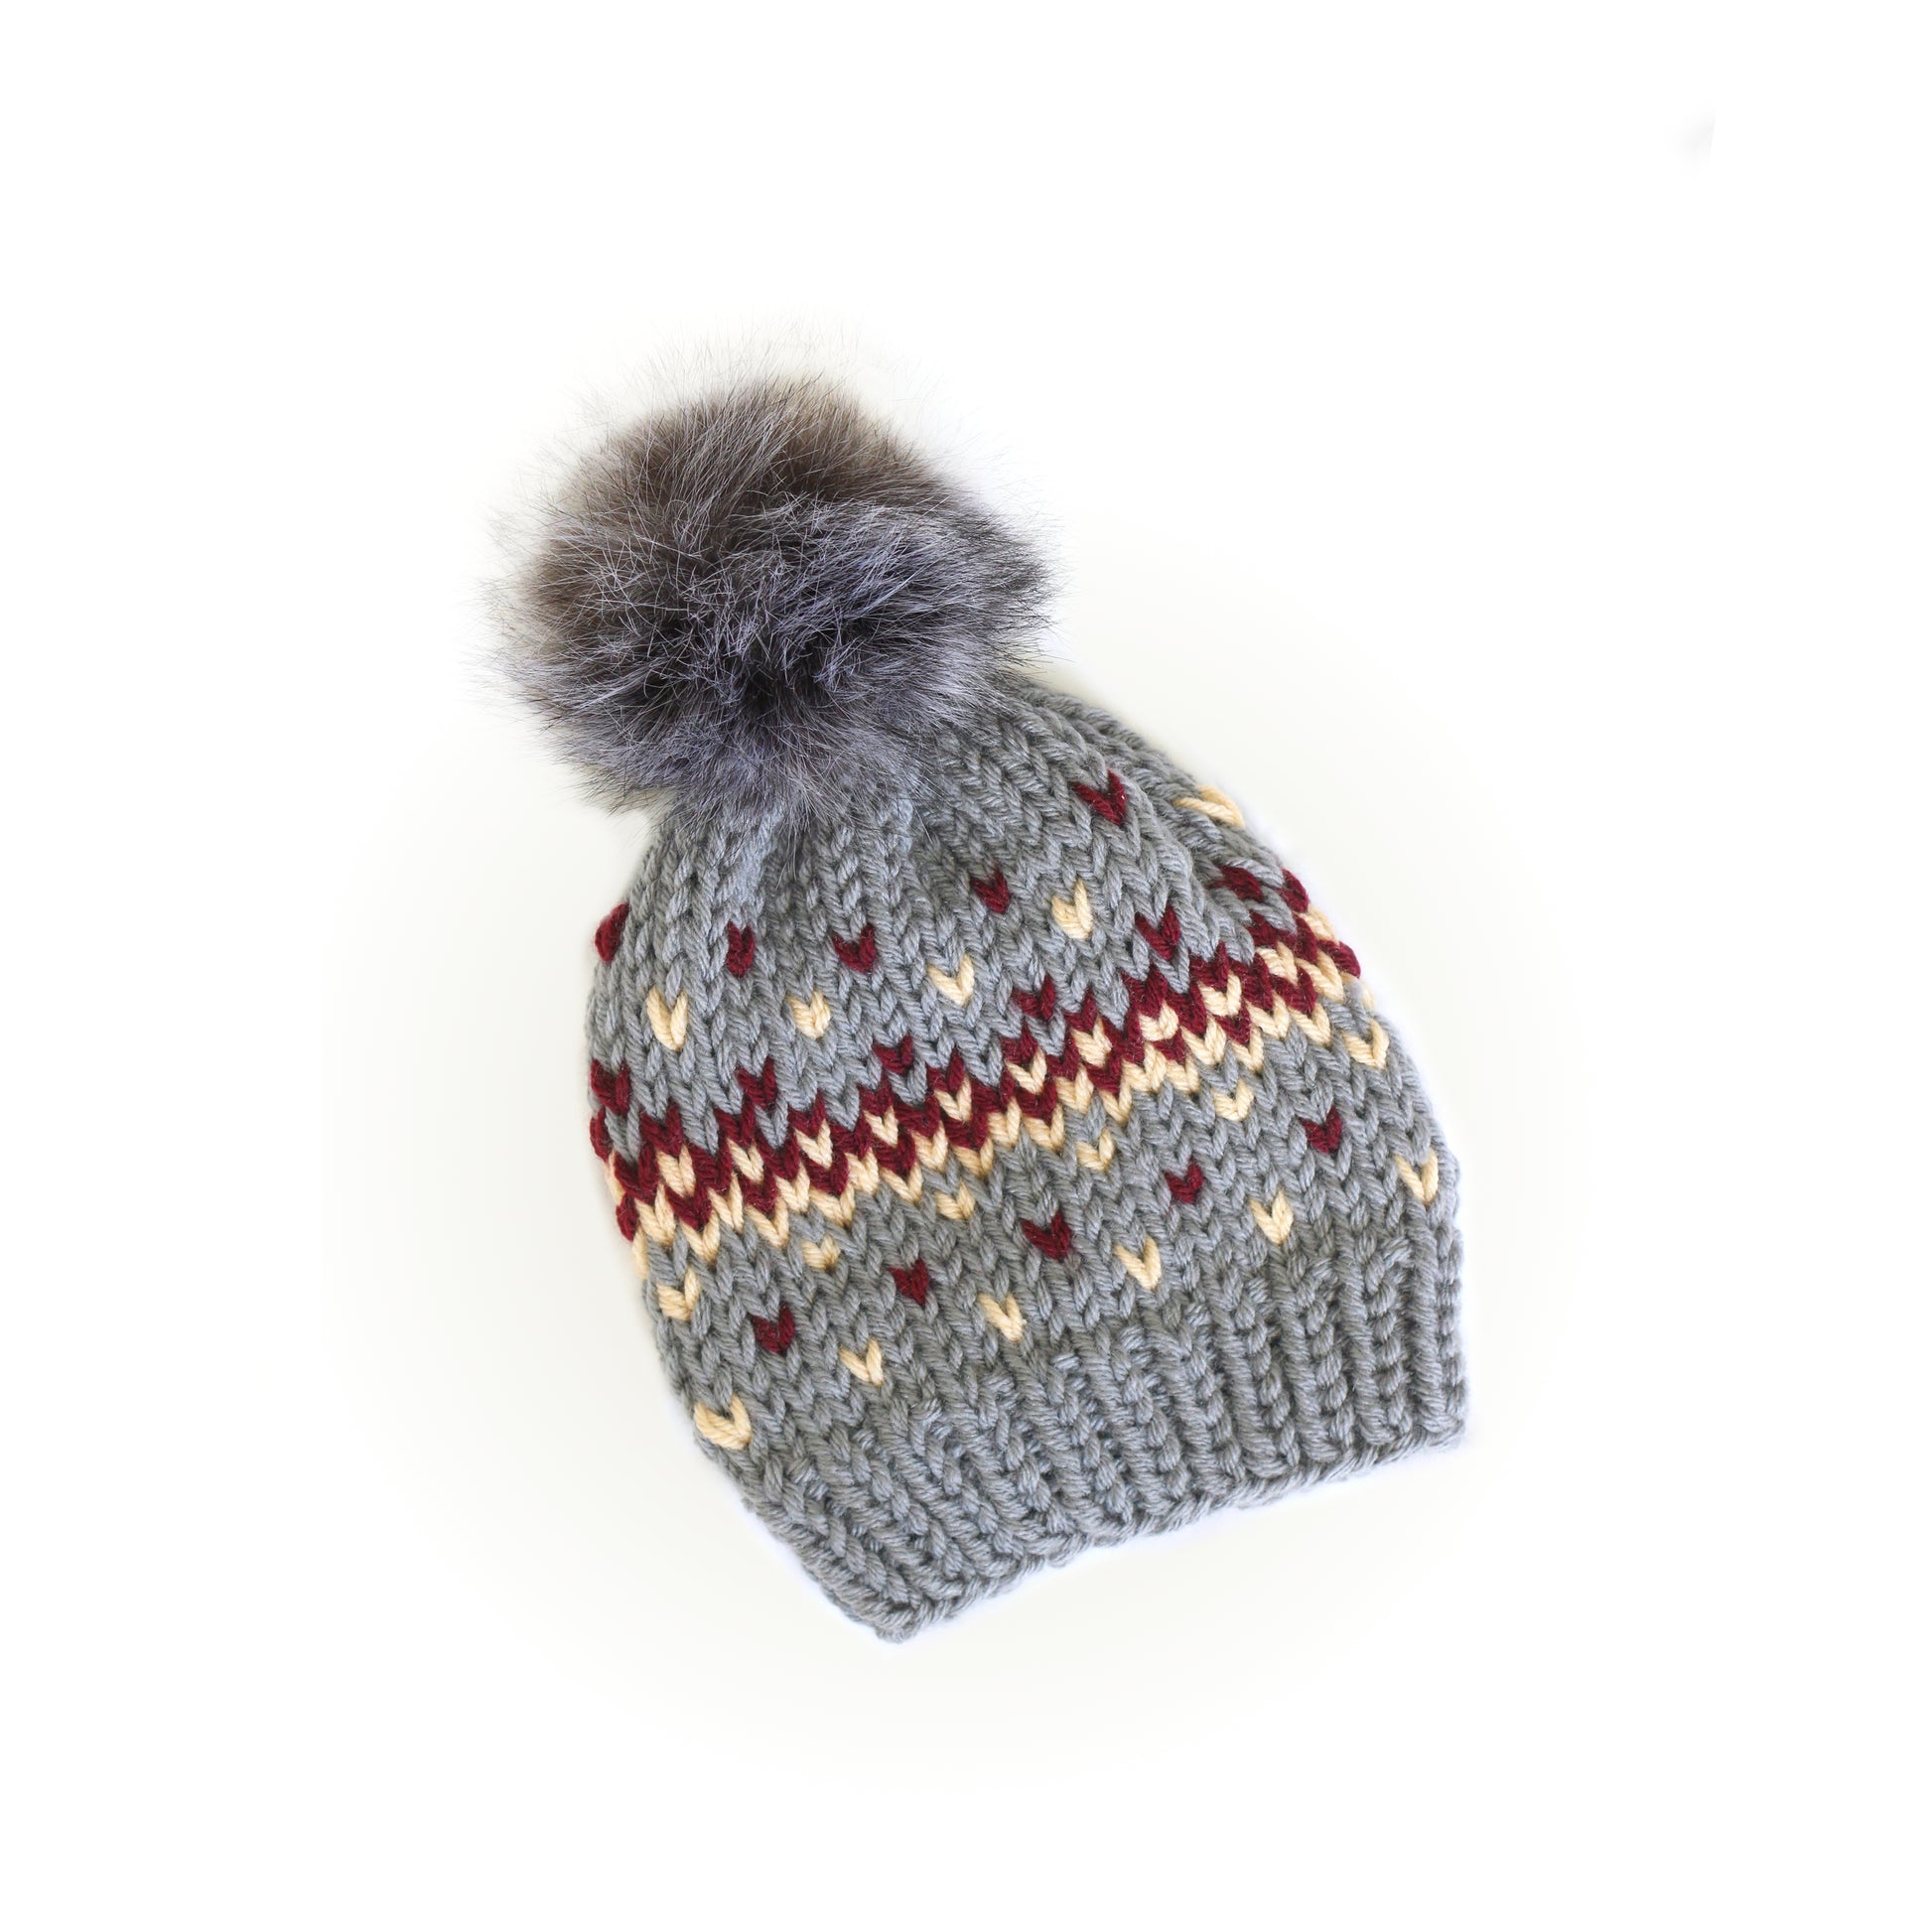 Knit Beanie Hat with Faux Fur Pom - Fair Isle Taupe Brown Hat